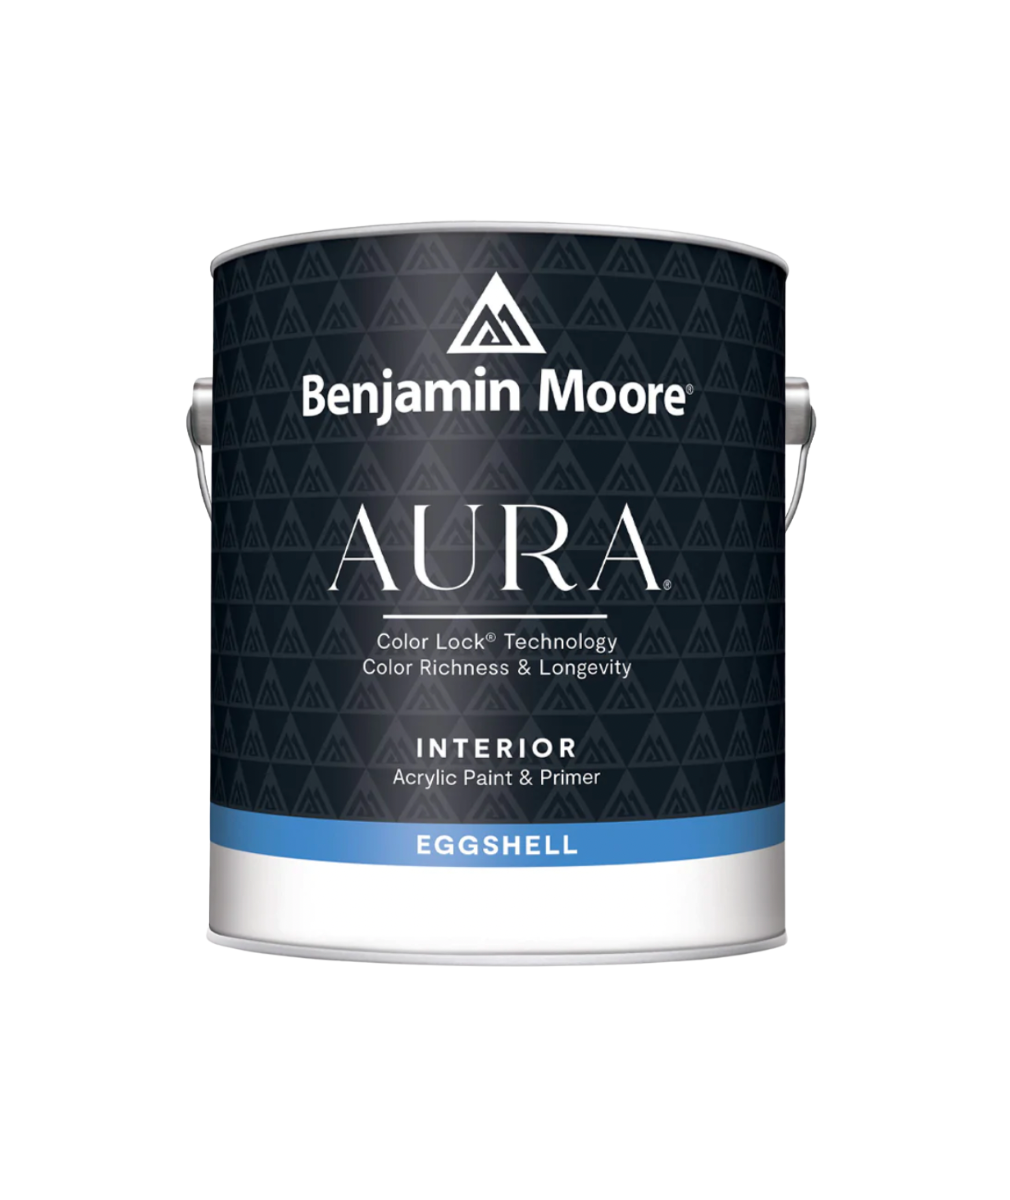 Benjamin Moore Eggshell Interior Paint available at Regal Paint Centers.